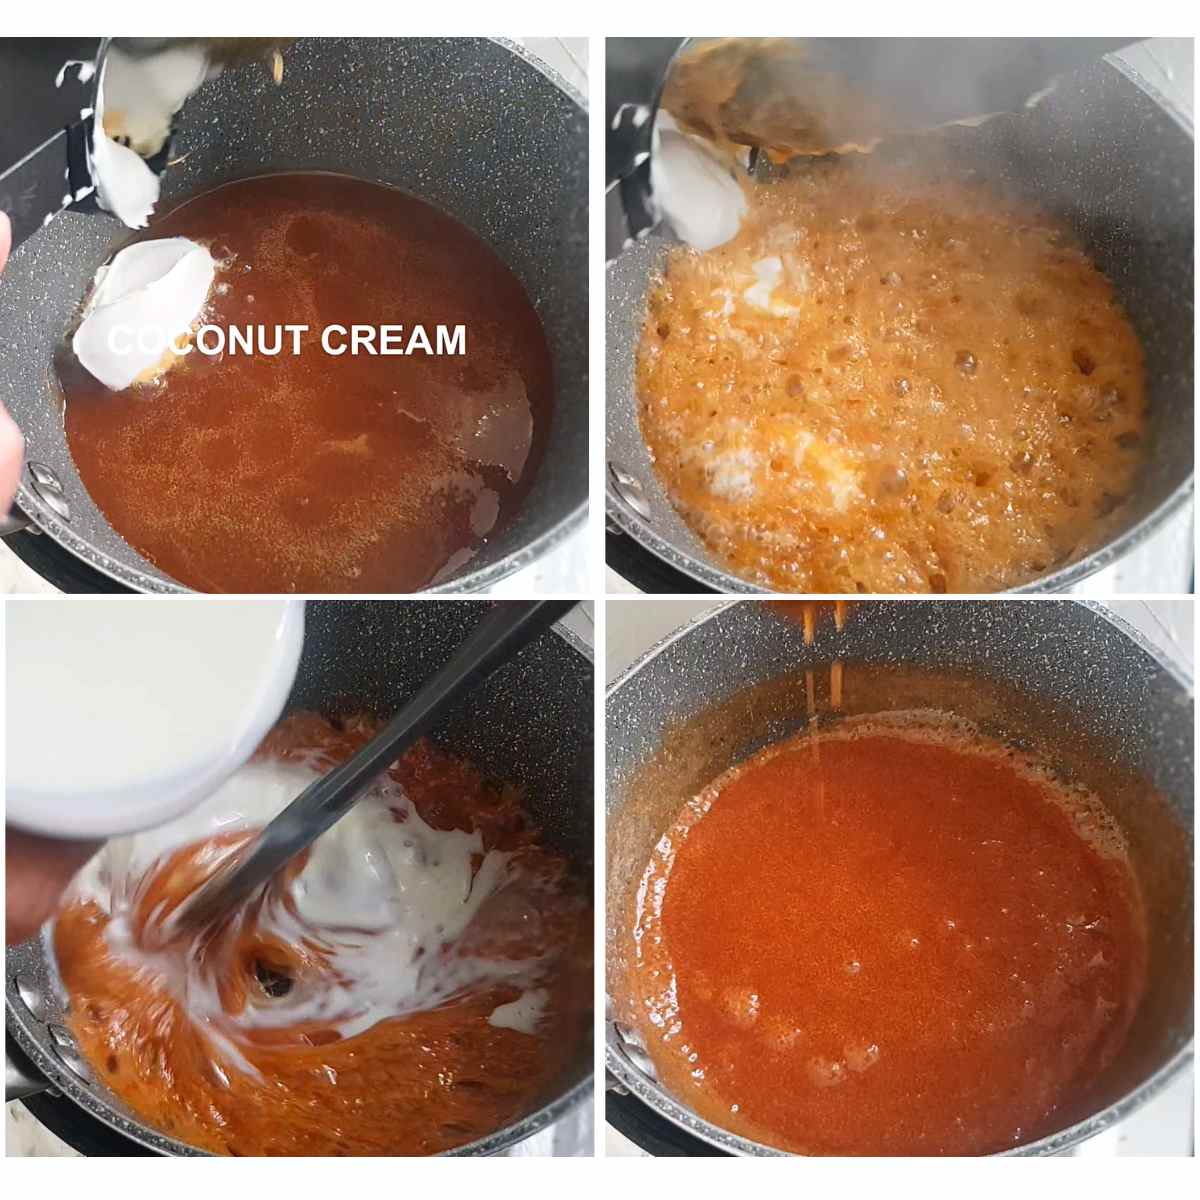 Image collage of how to make the vegan salted caramel step by step.